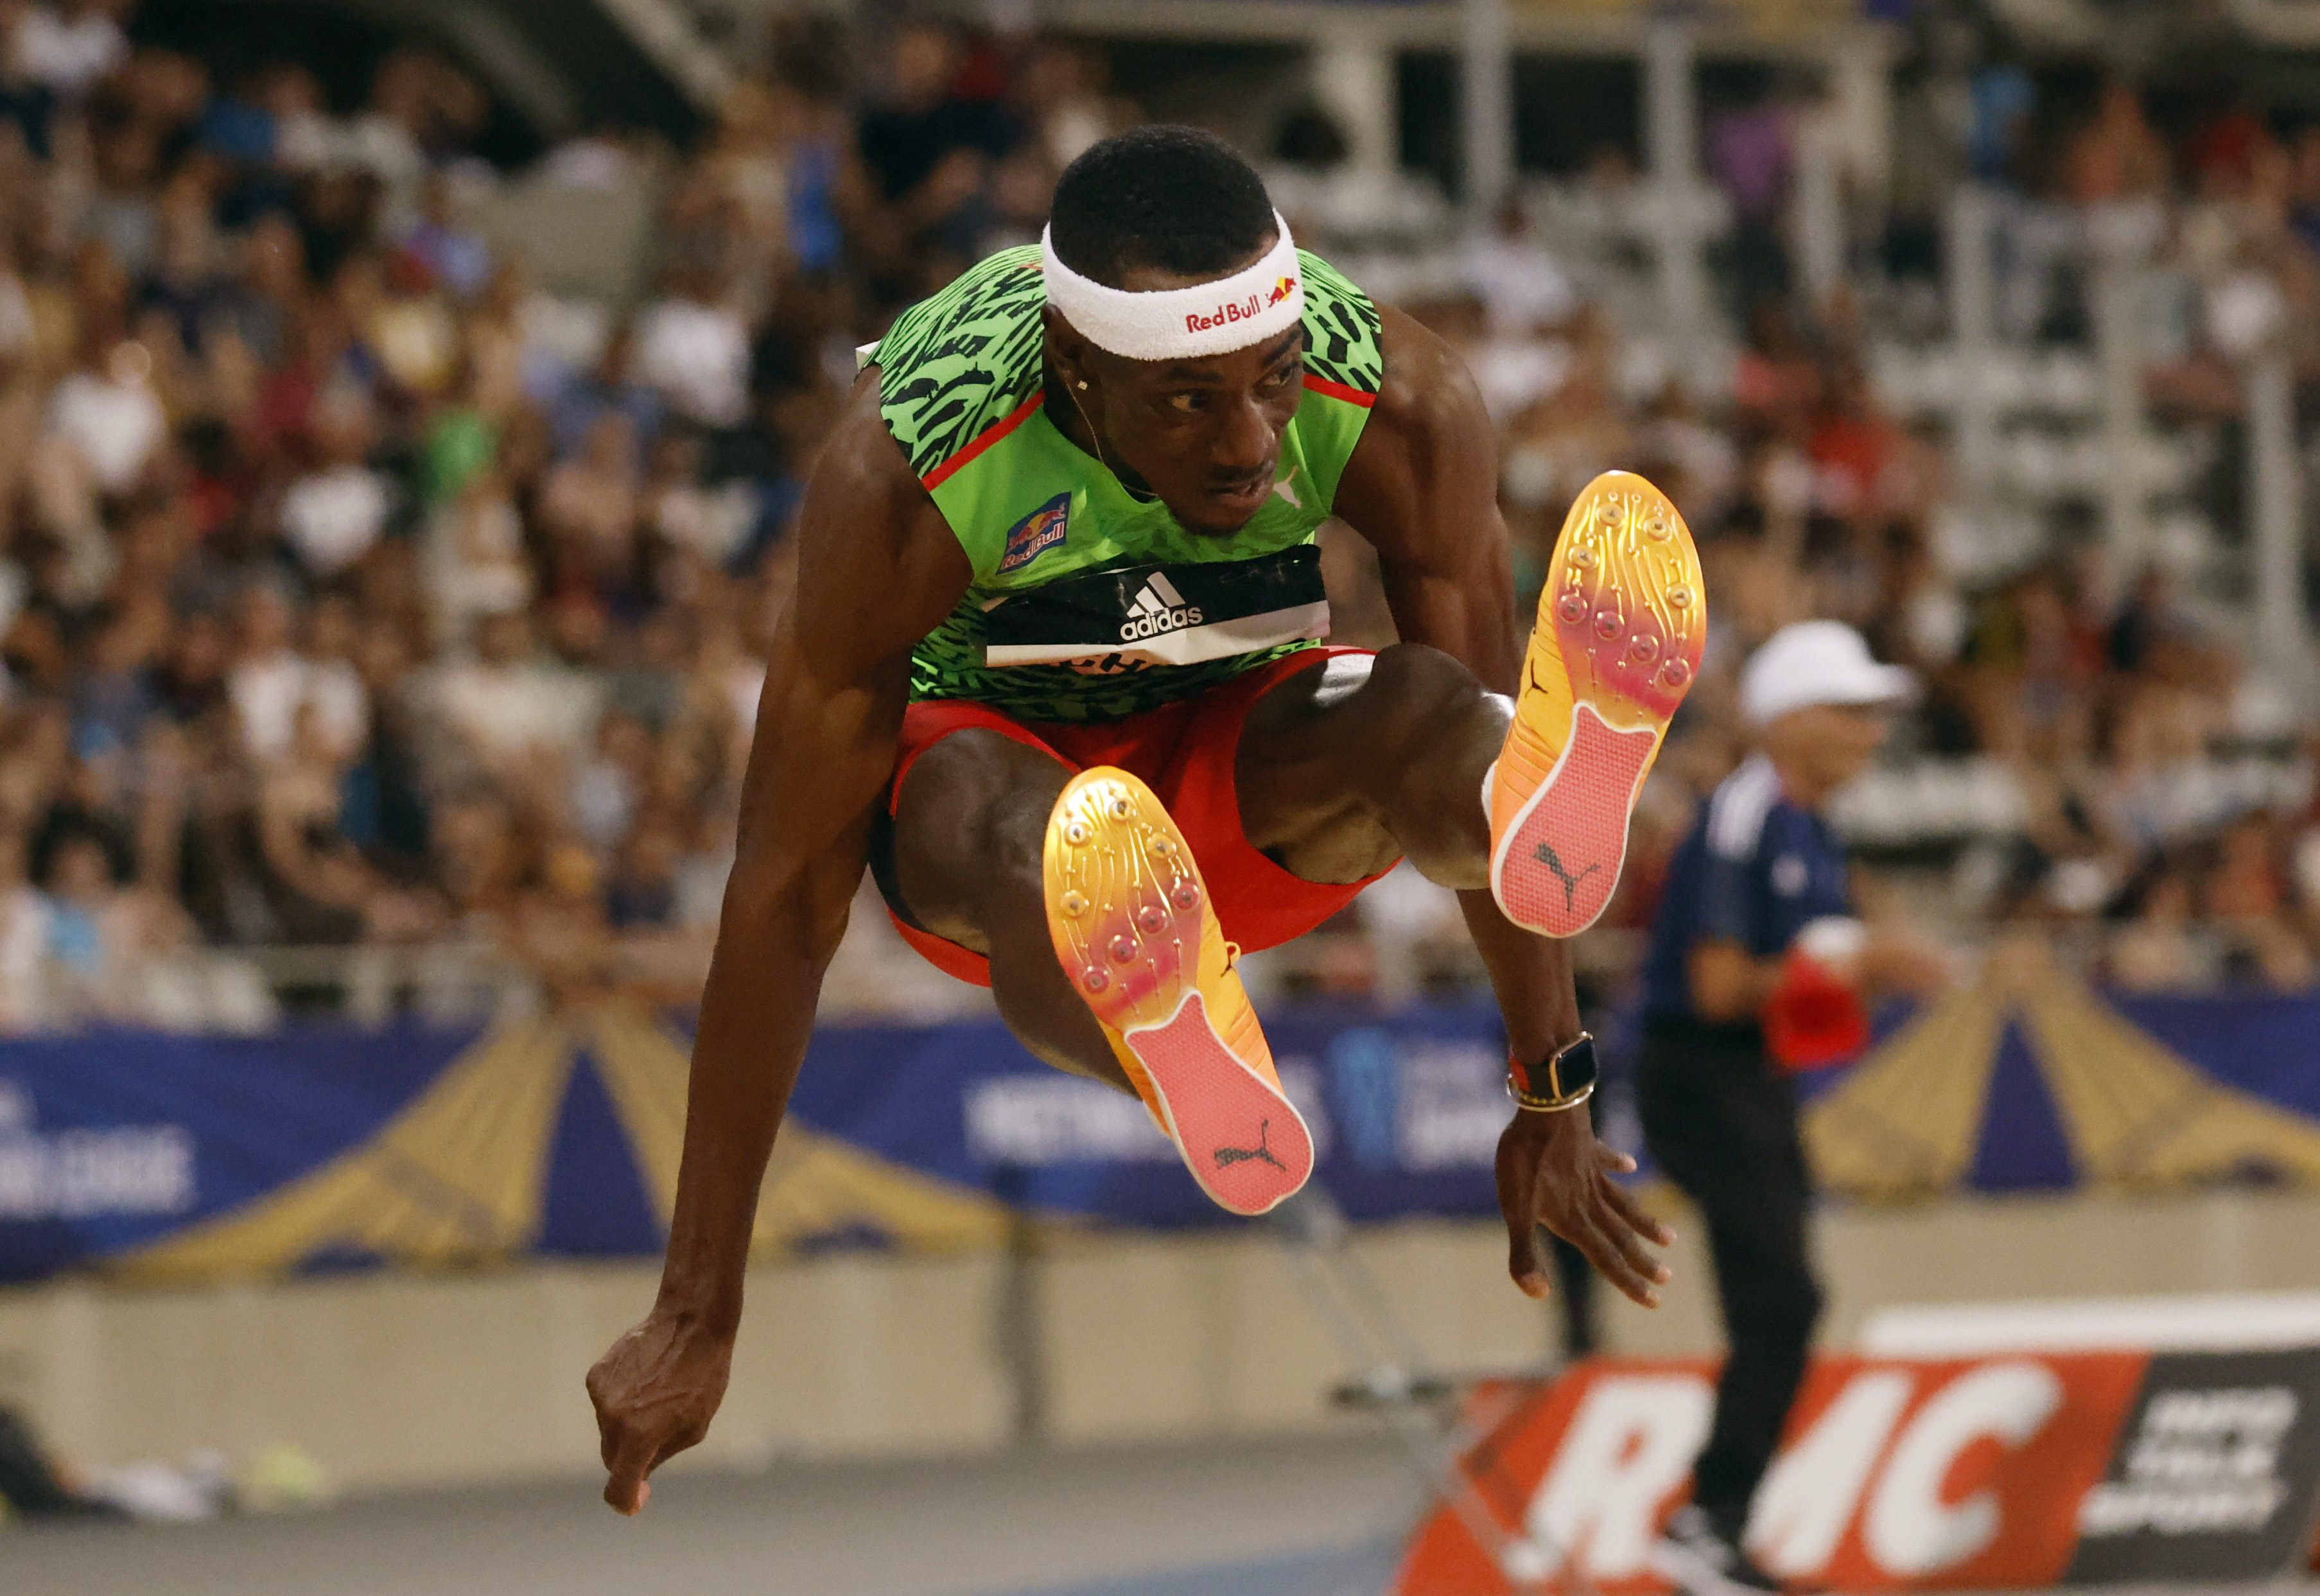 Pichardo eases to world jump gold Reuters